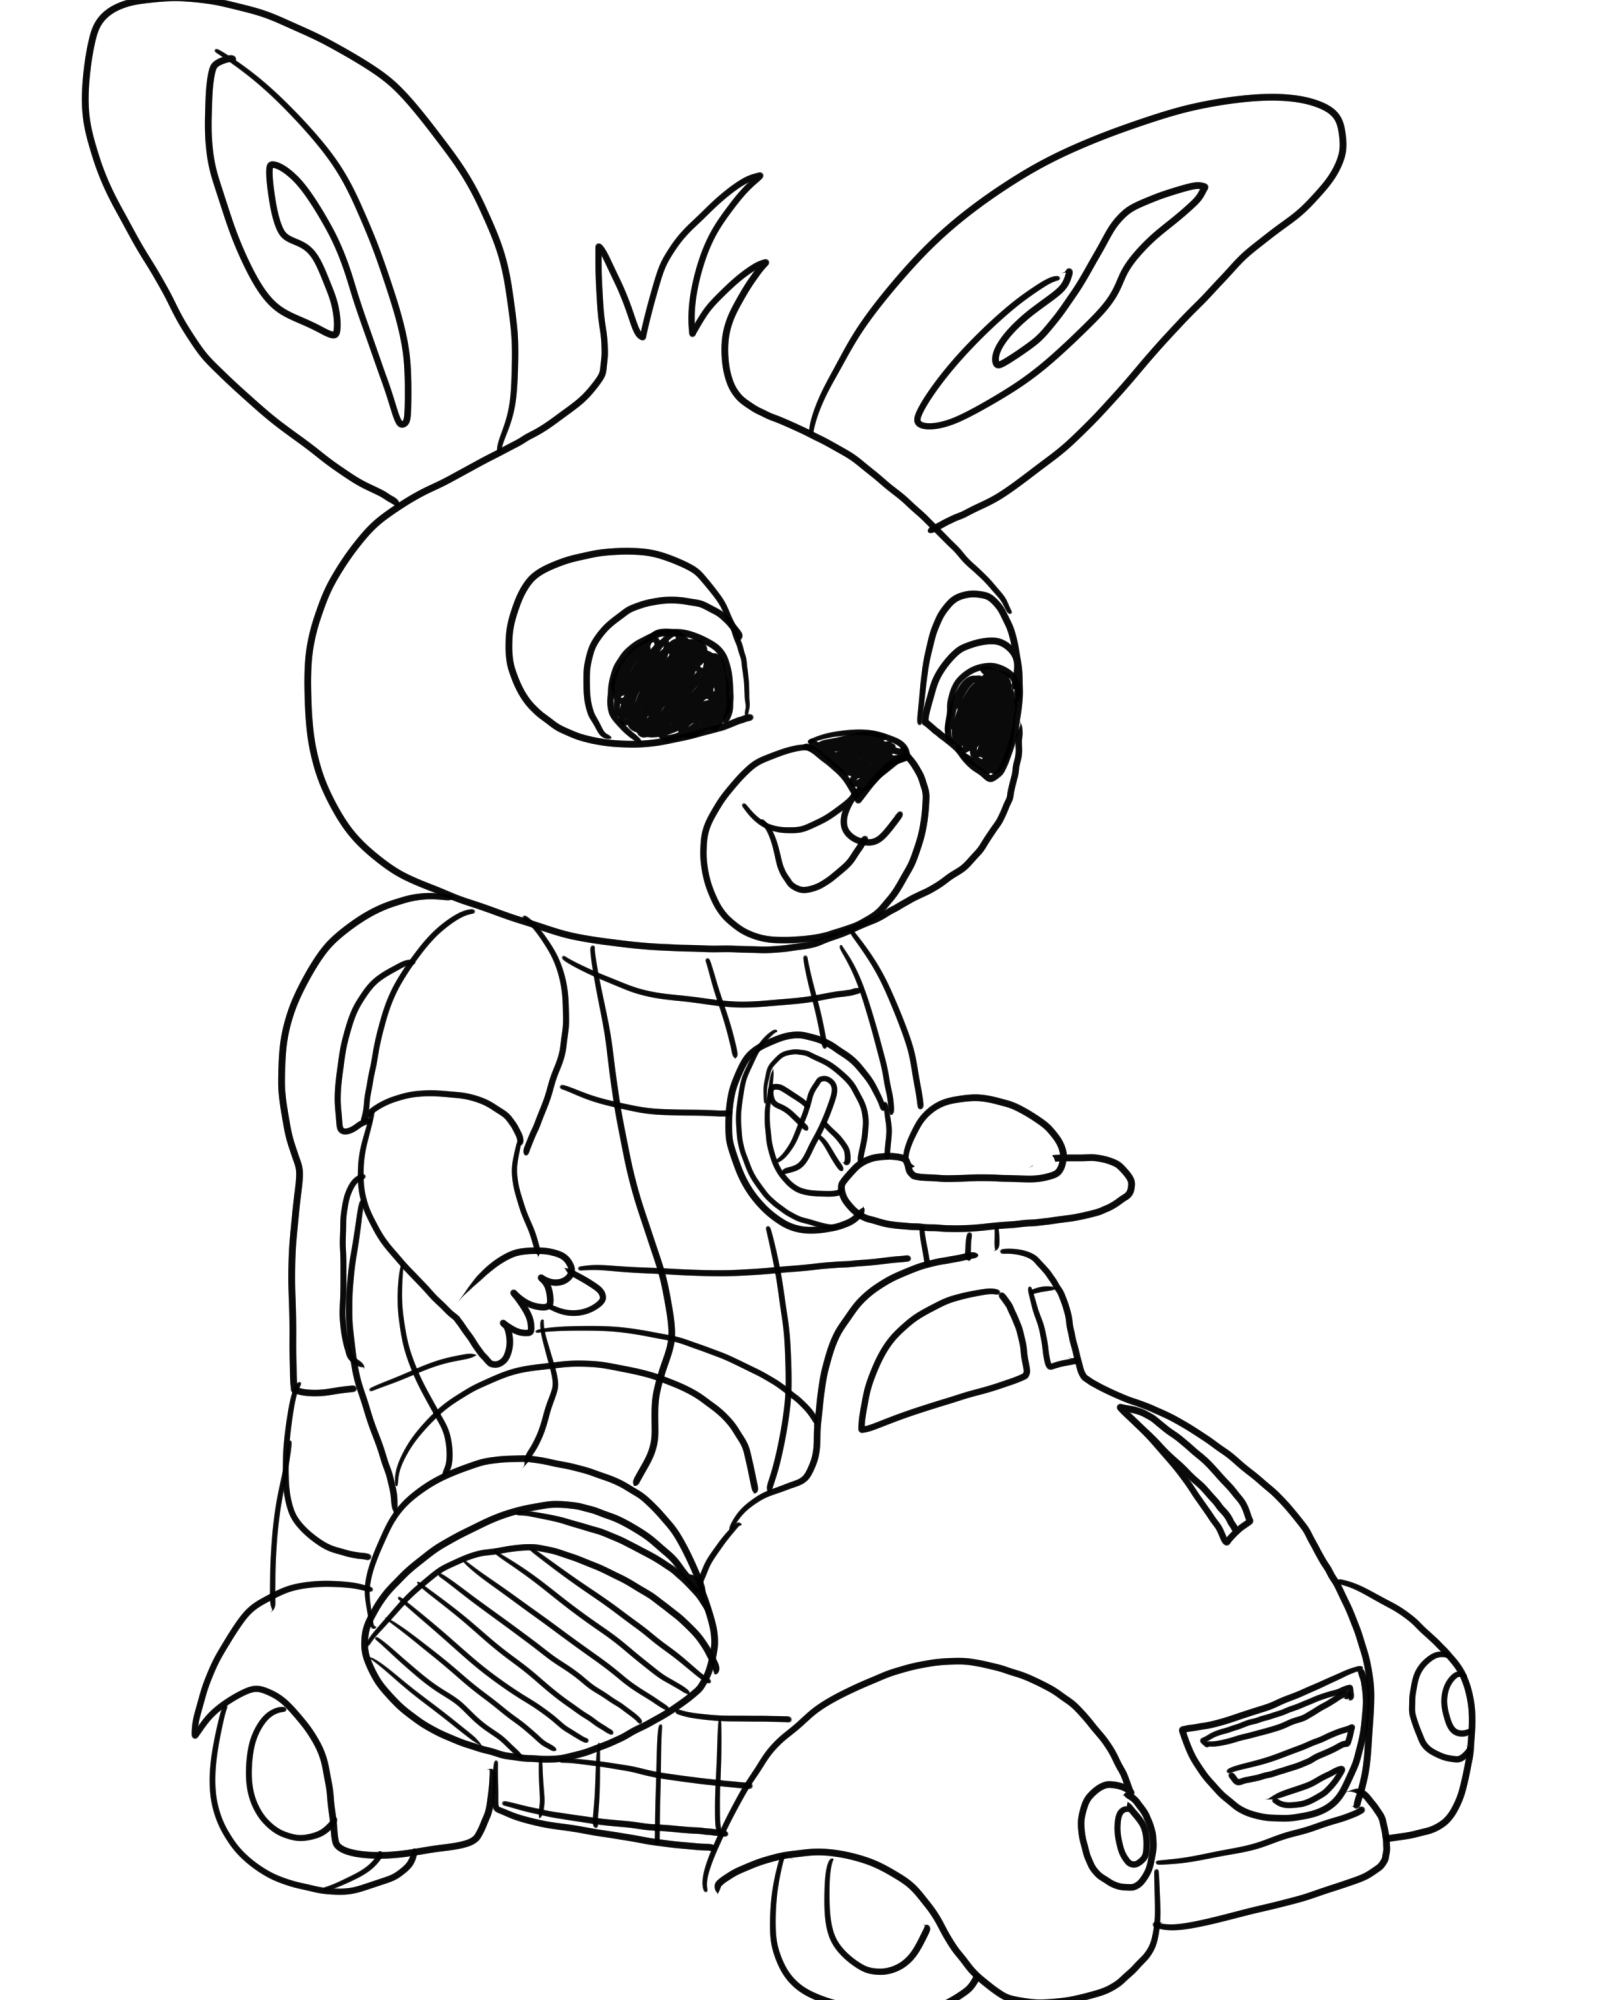 Drawing of Bing above the toy car to print and color